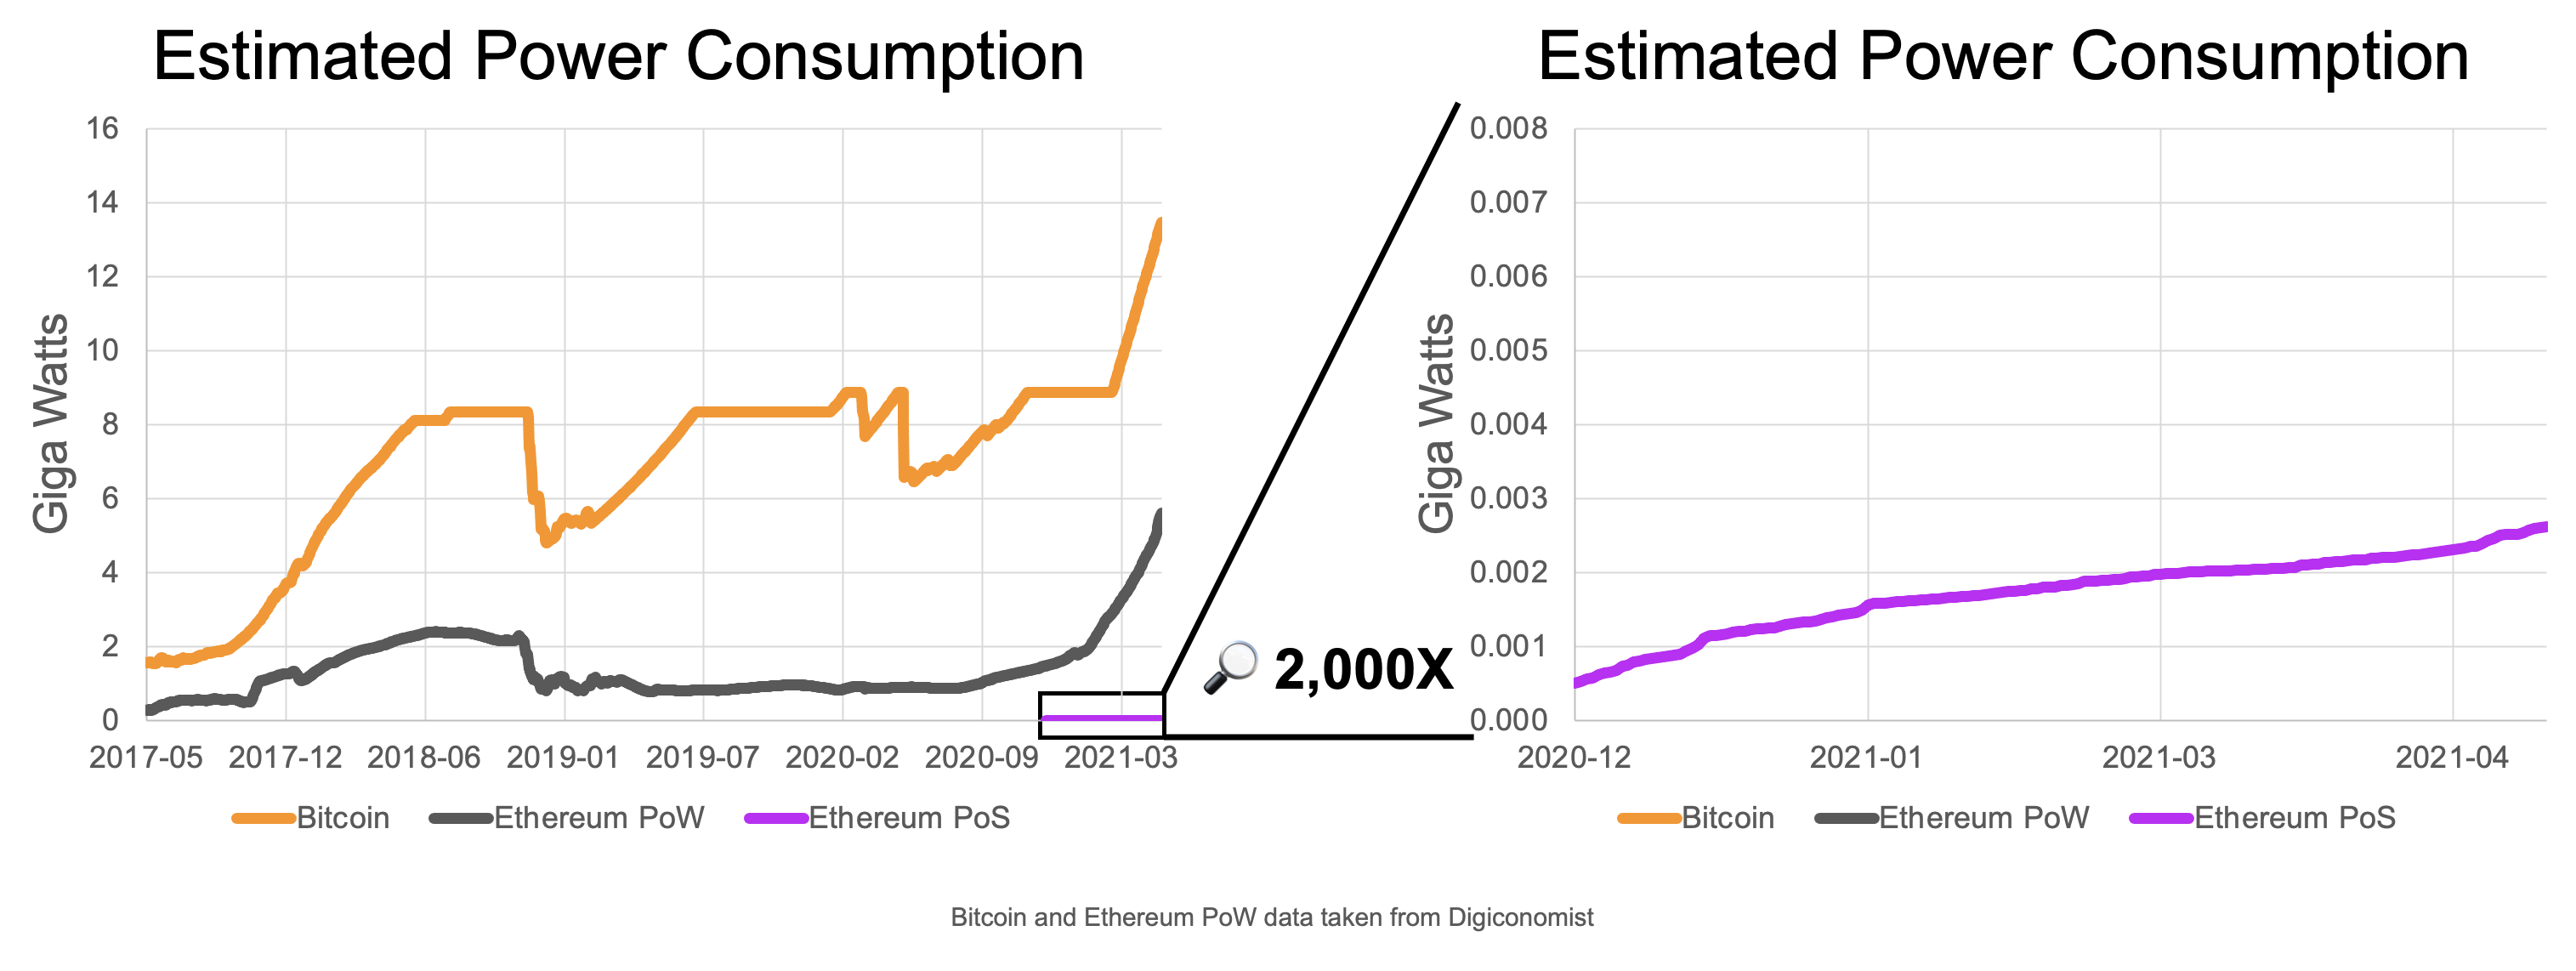 Ethereum Power Consumption pre and post Merge